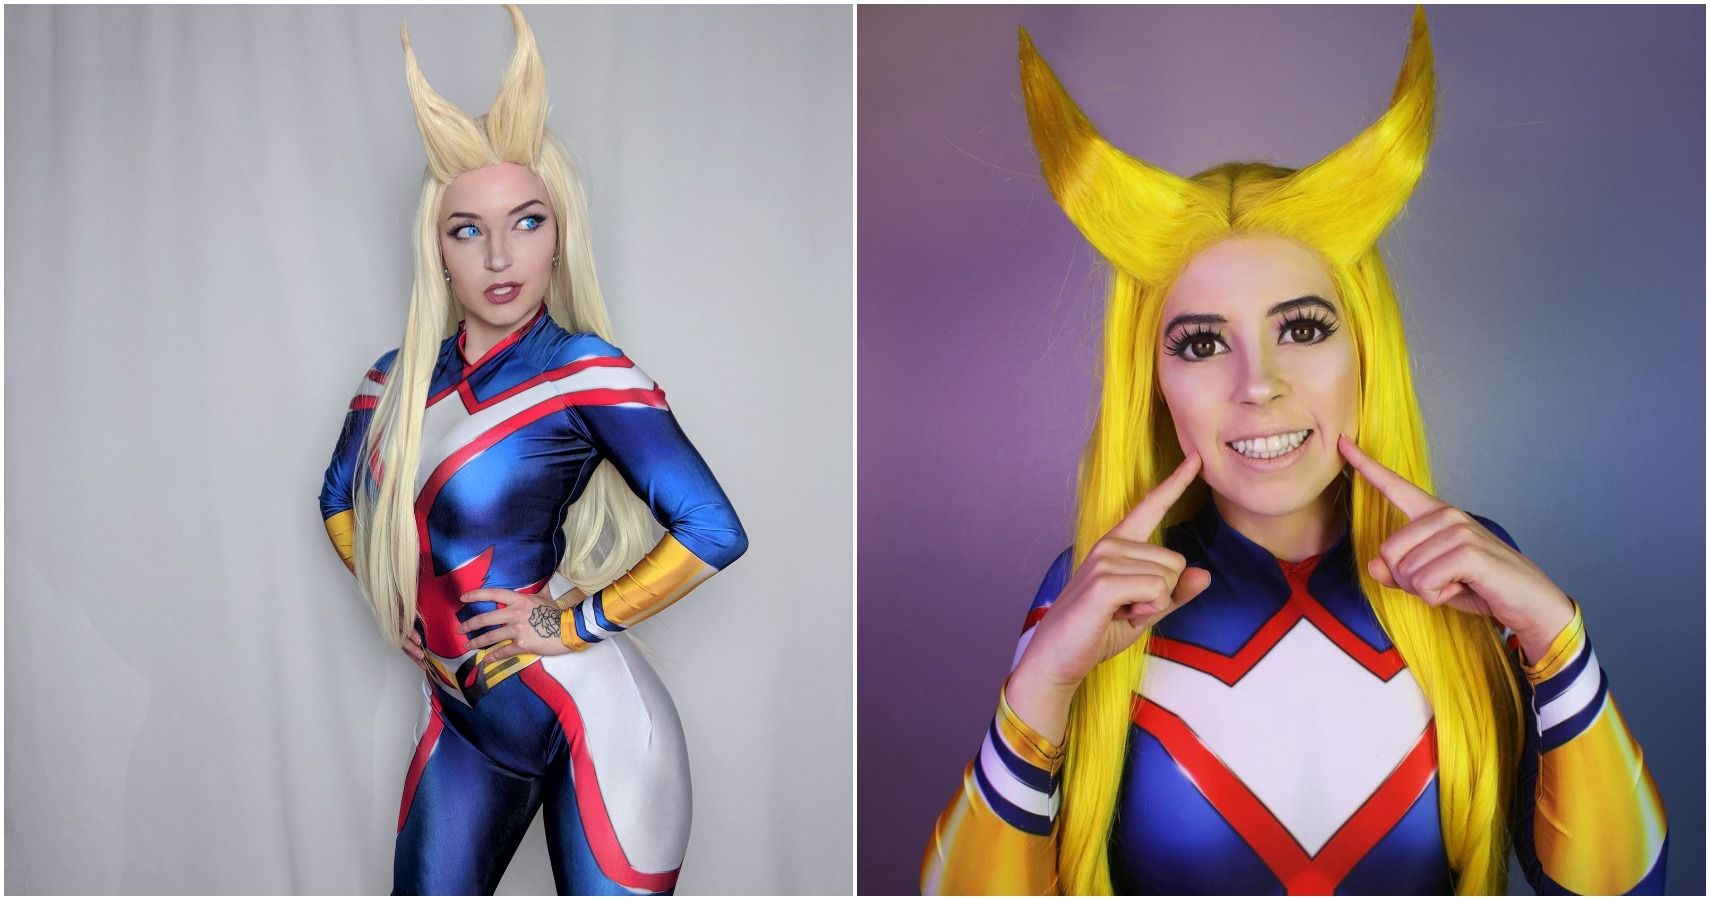 Two cosplayers posing as All Might from My Hero Academia